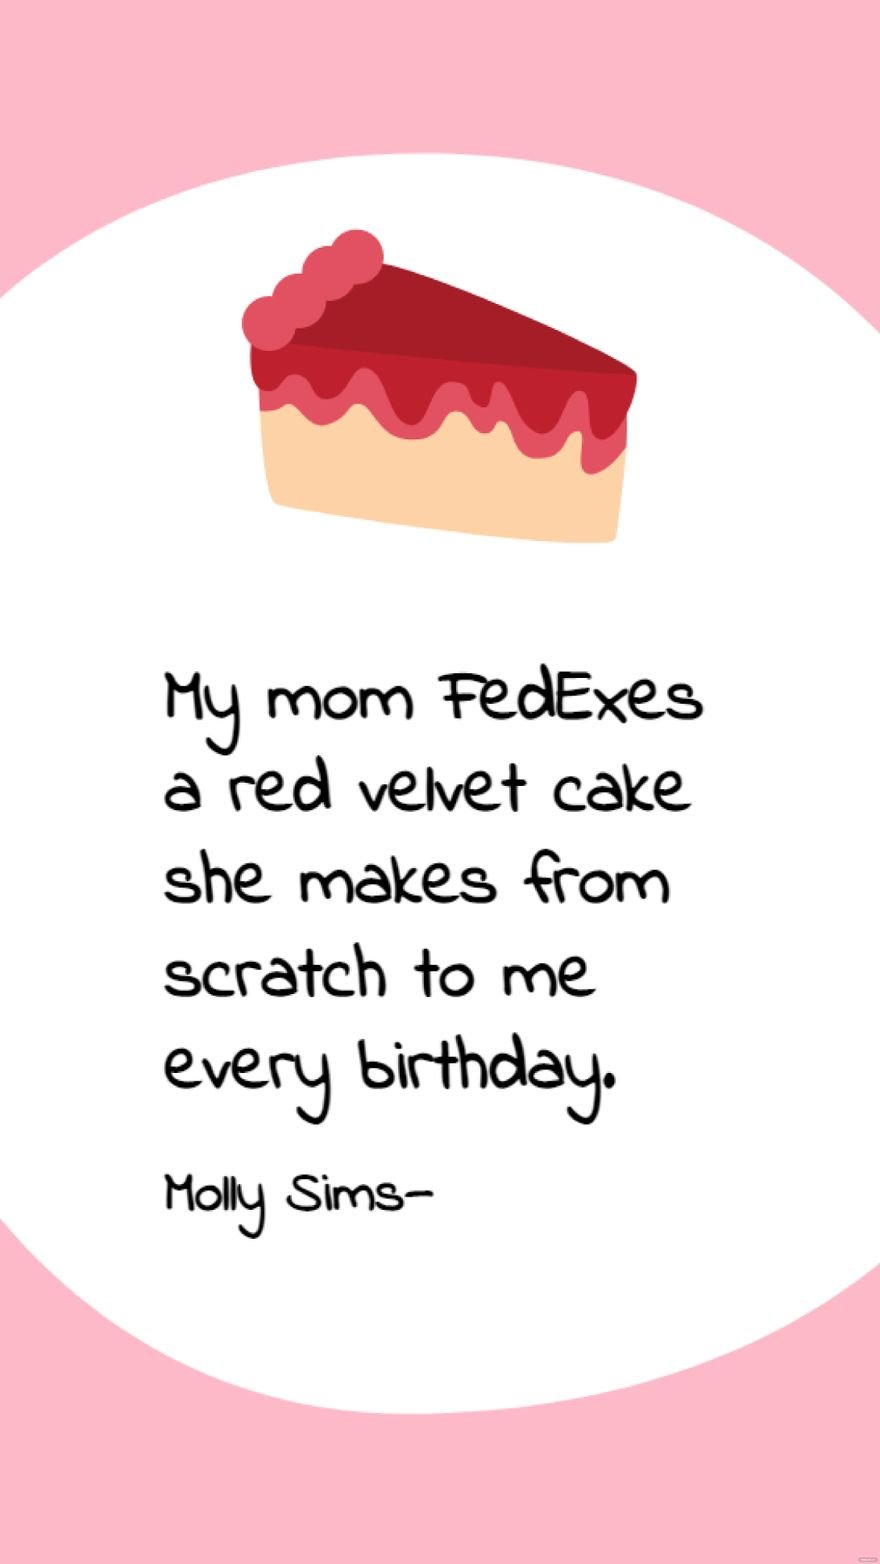 Free Molly Sims - My mom FedExes a red velvet cake she makes from scratch to me every birthday. in JPG